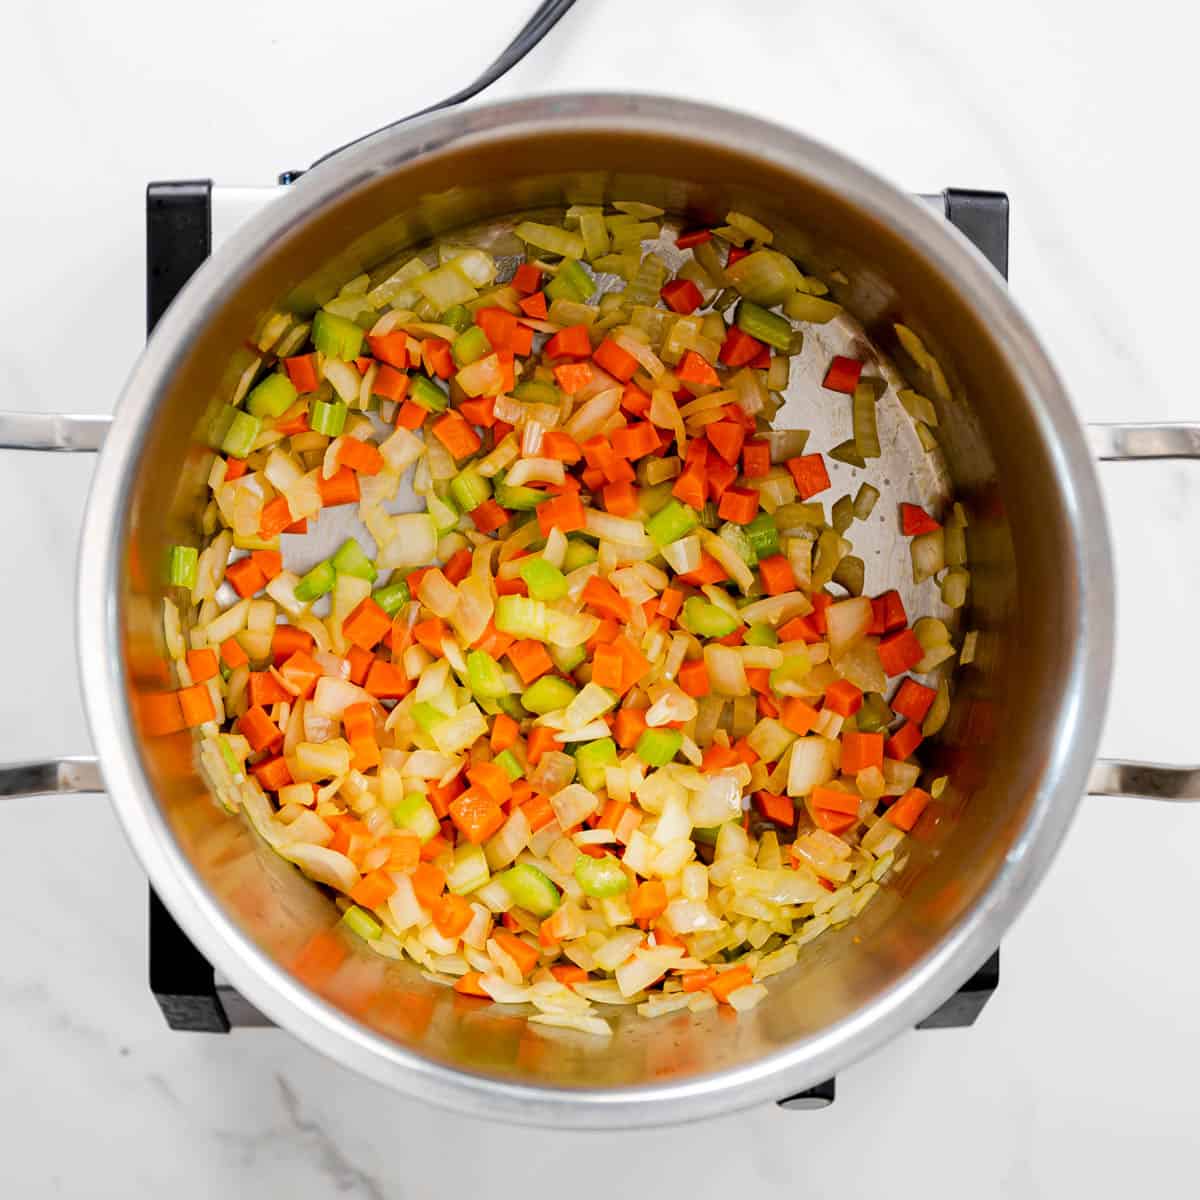 Cook the Mirepoix.